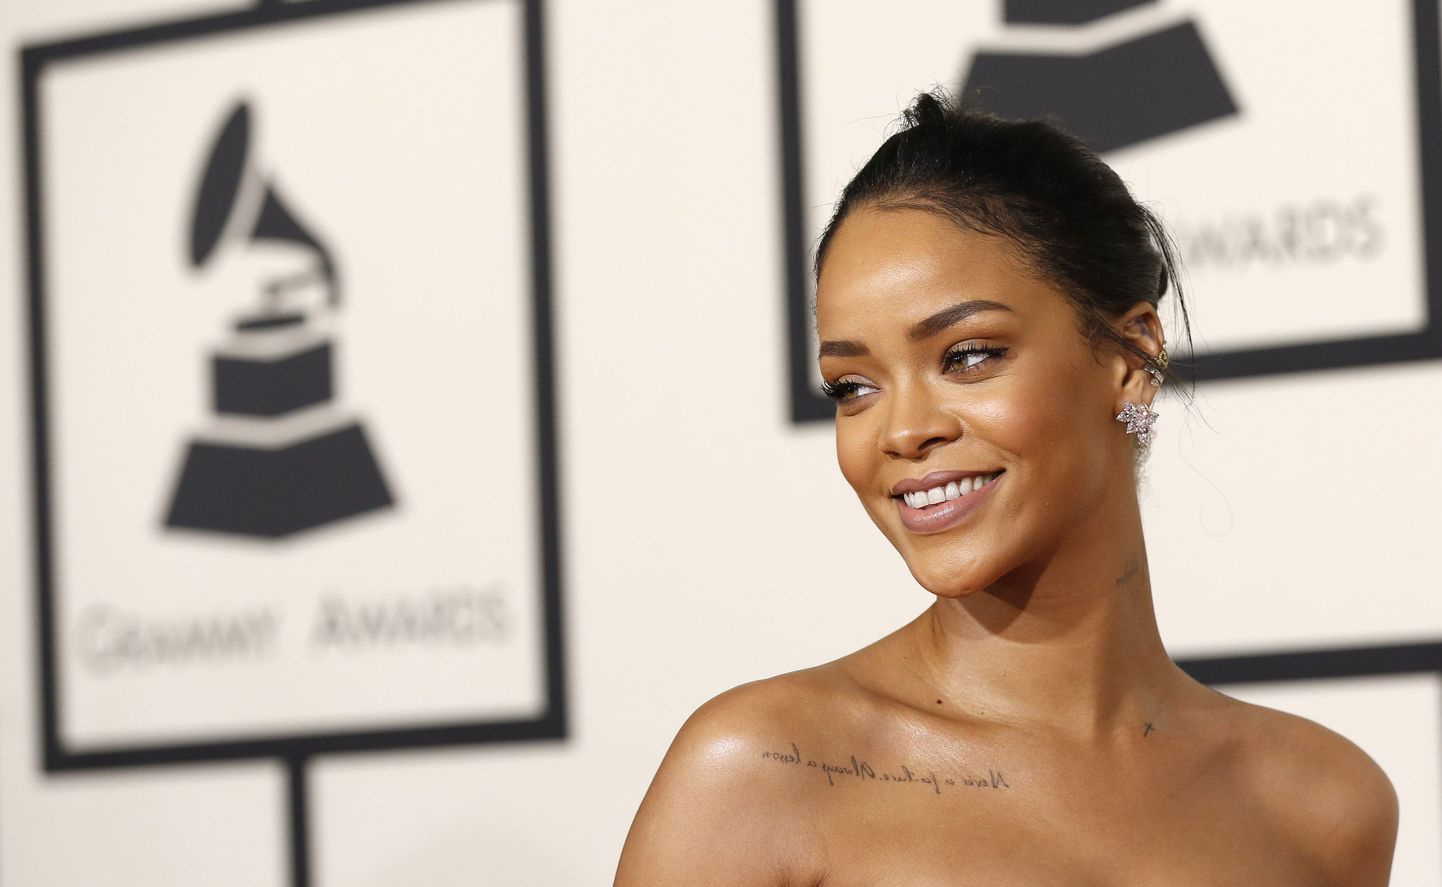 Singer Rihanna arrives at the 57th annual Grammy Awards in Los Angeles, California February 8, 2015.  REUTERS/Mario Anzuoni  (UNITED STATES - TAGS: ENTERTAINMENT) (GRAMMYS-ARRIVALS)